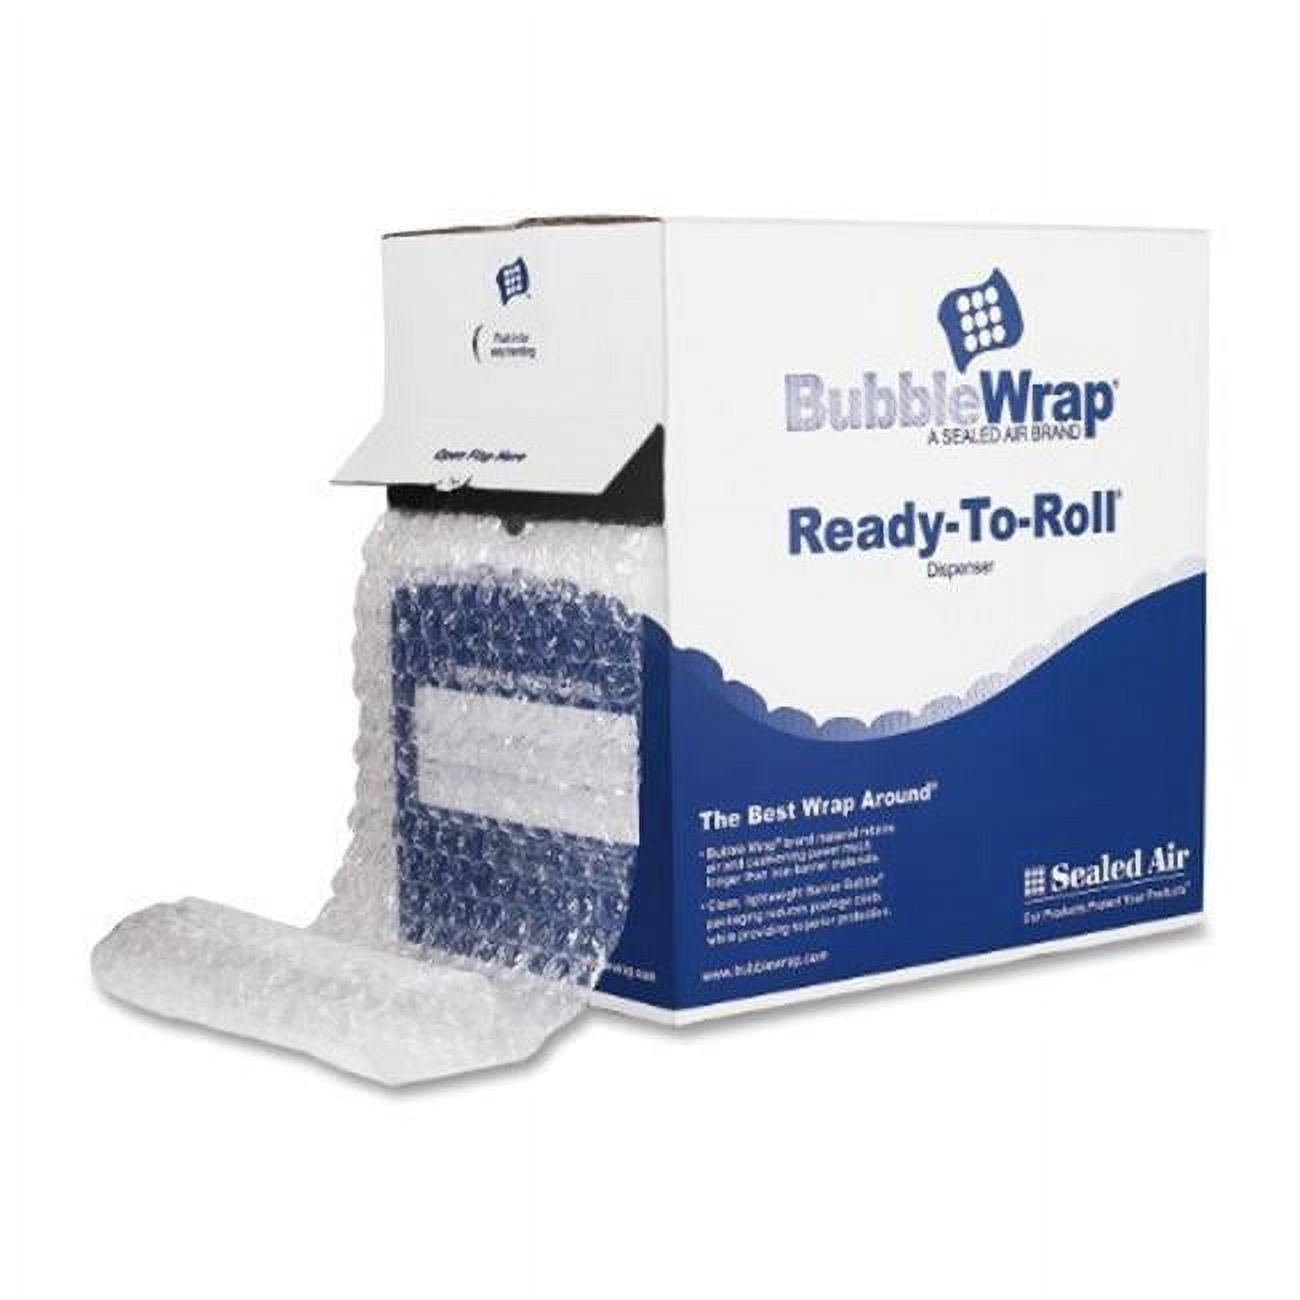 Picture of Sealed Air Quality Park SEL48561 Bubble Wrap in a Ready to Roll Dispenser Carton